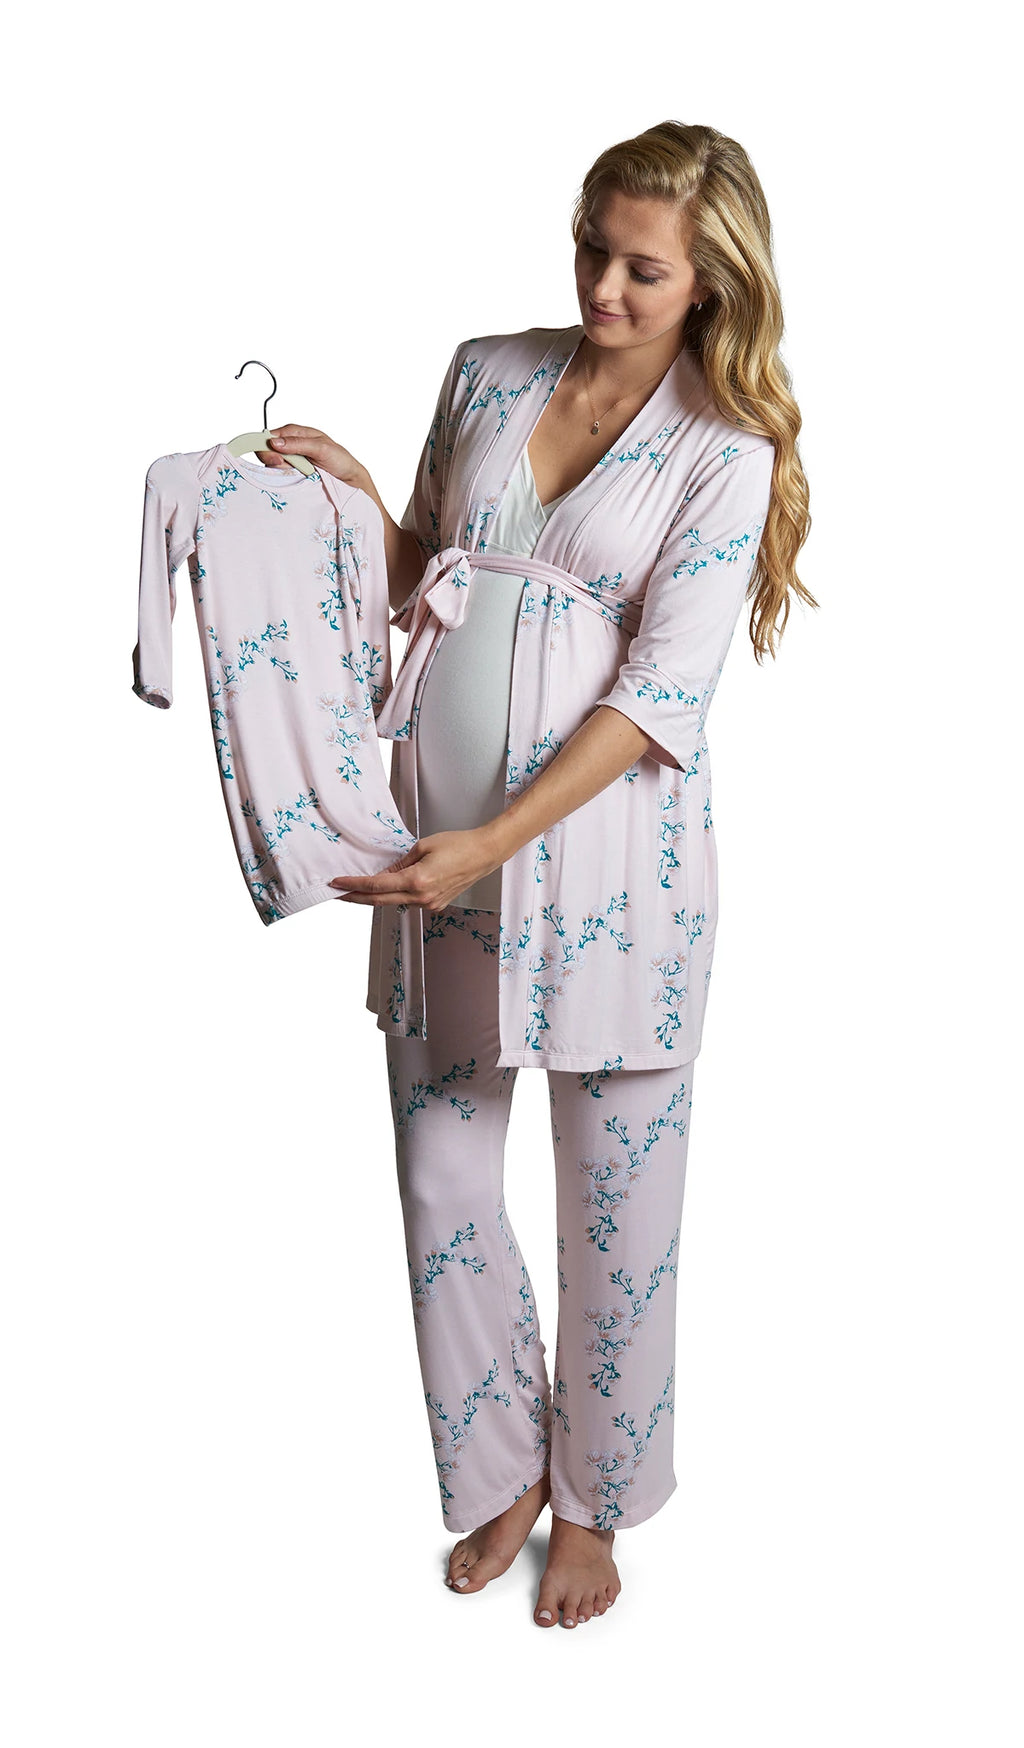 Everly Grey Analise 5-Piece Set - Assorted Styles